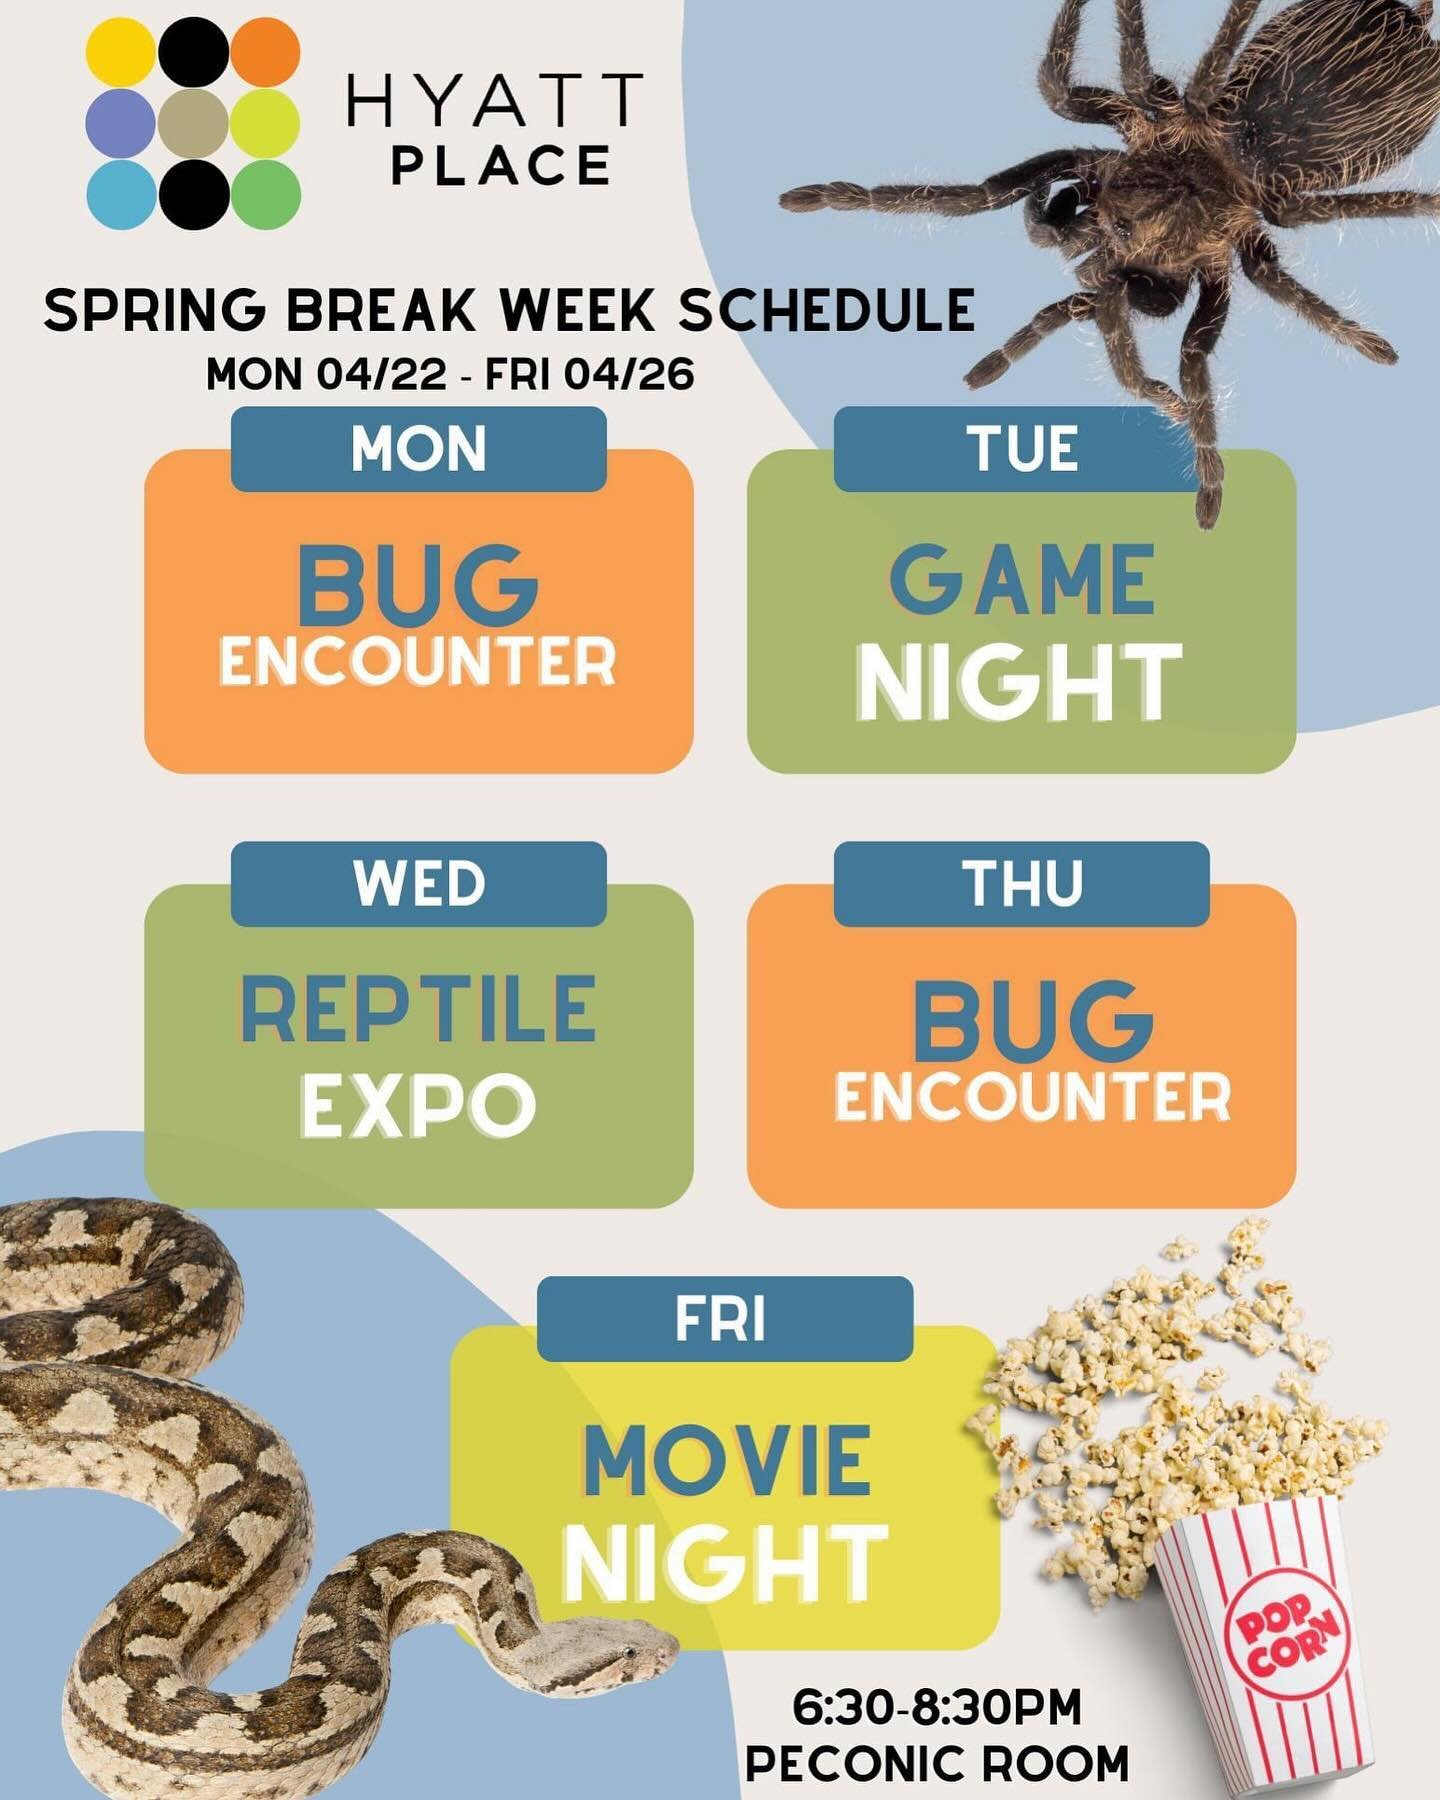 Still looking for where you&rsquo;ll spend your Spring Break? Look no further&hellip; @hyattplaceeastend has some amazing events planned for you and your family! 🐍🕷️🍿🎥

#springbreak #hyattplaceeastend #thehyatt #stayandplay #longisland #discoverl